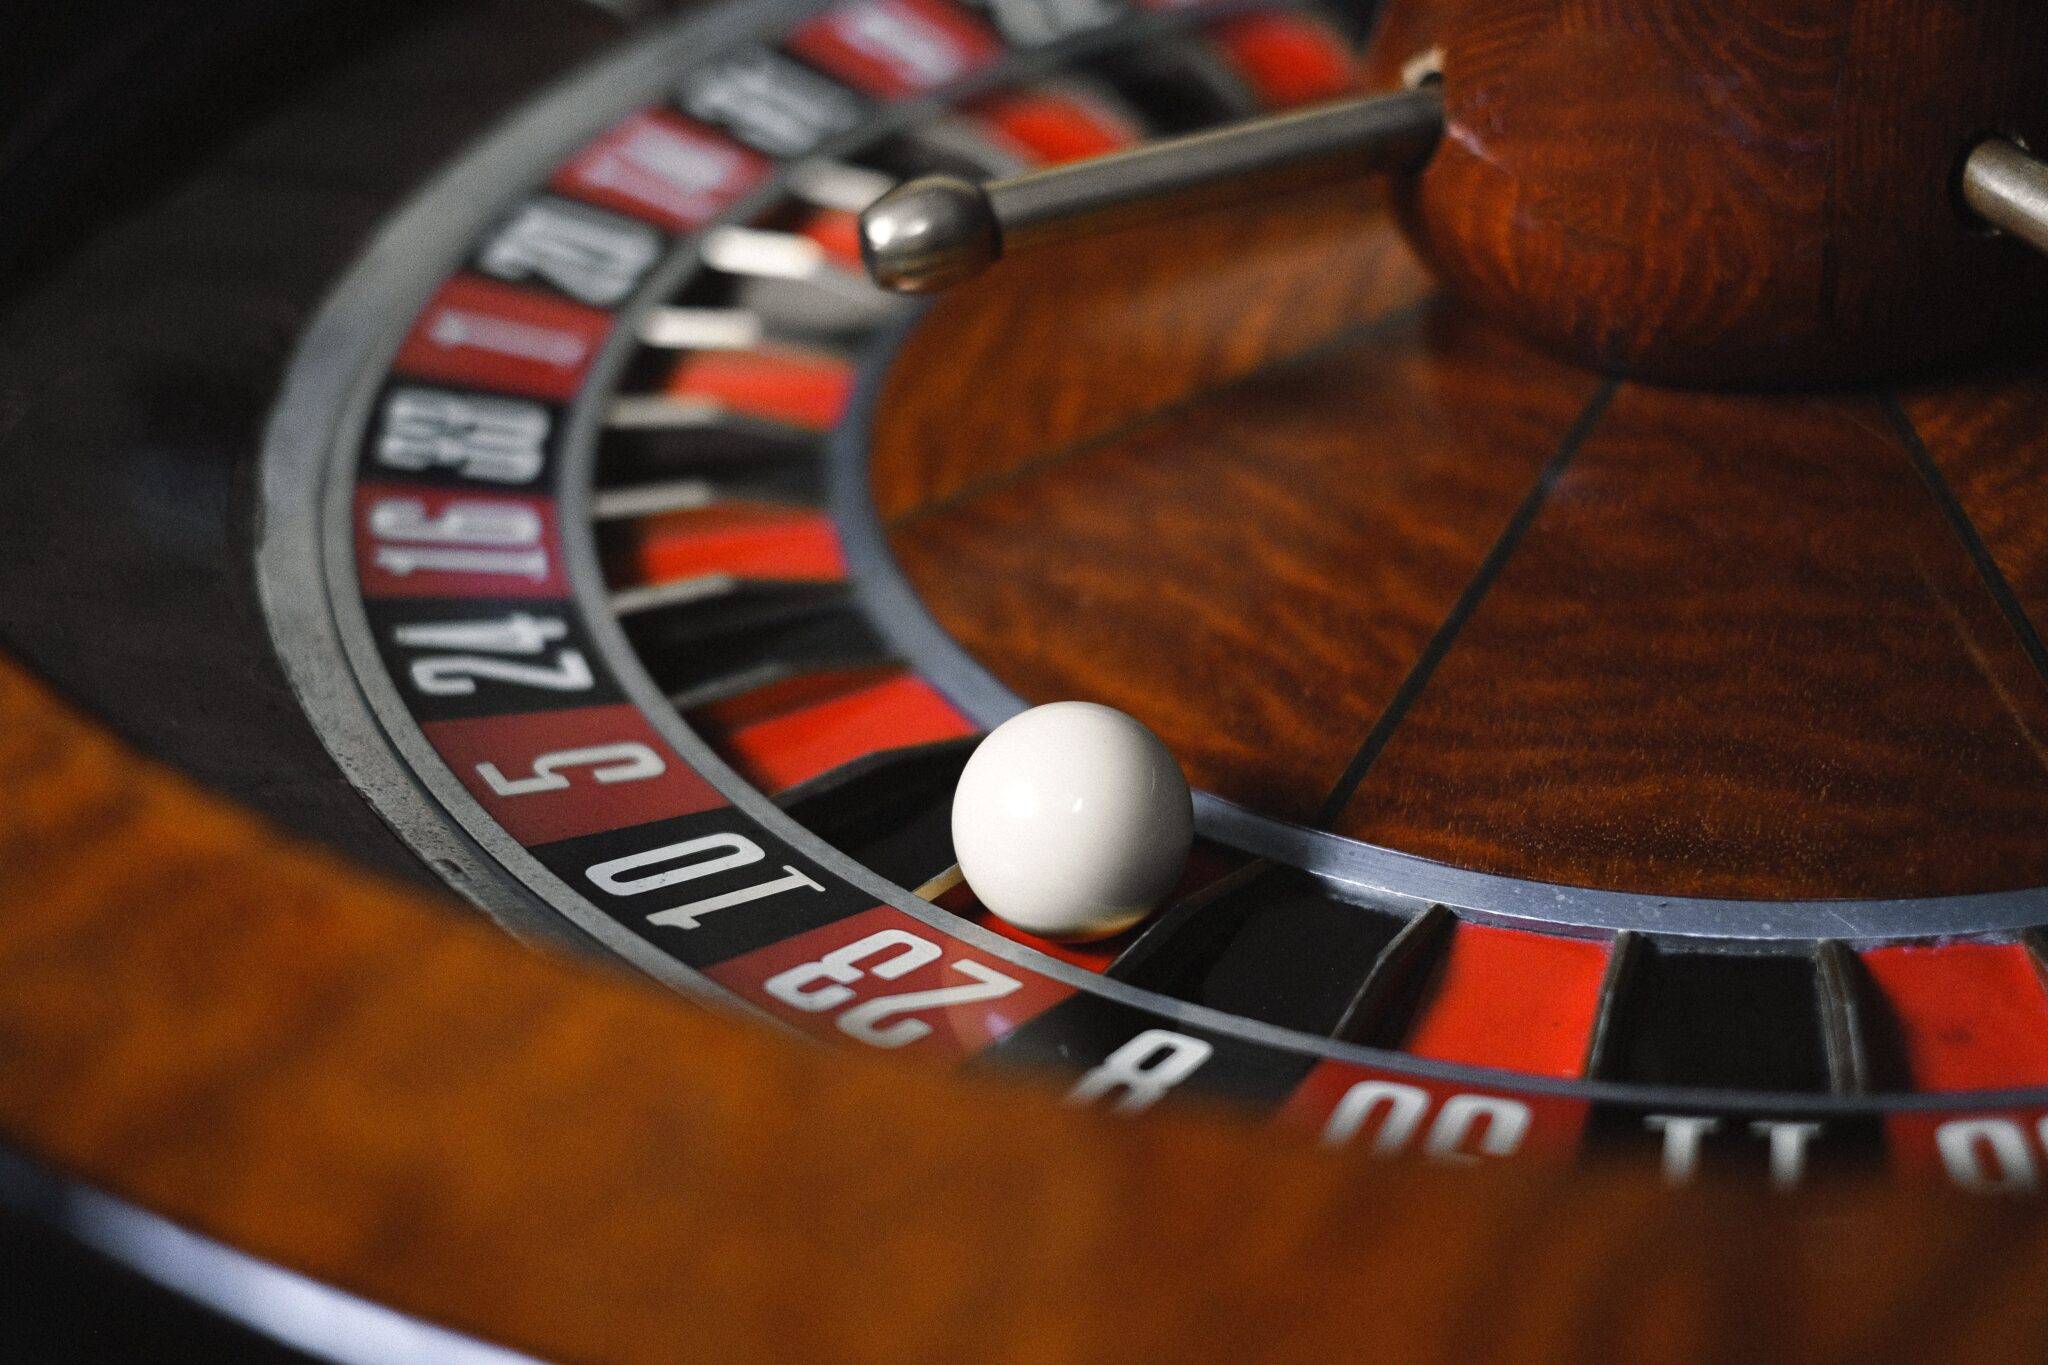 how to win at roulette at aria